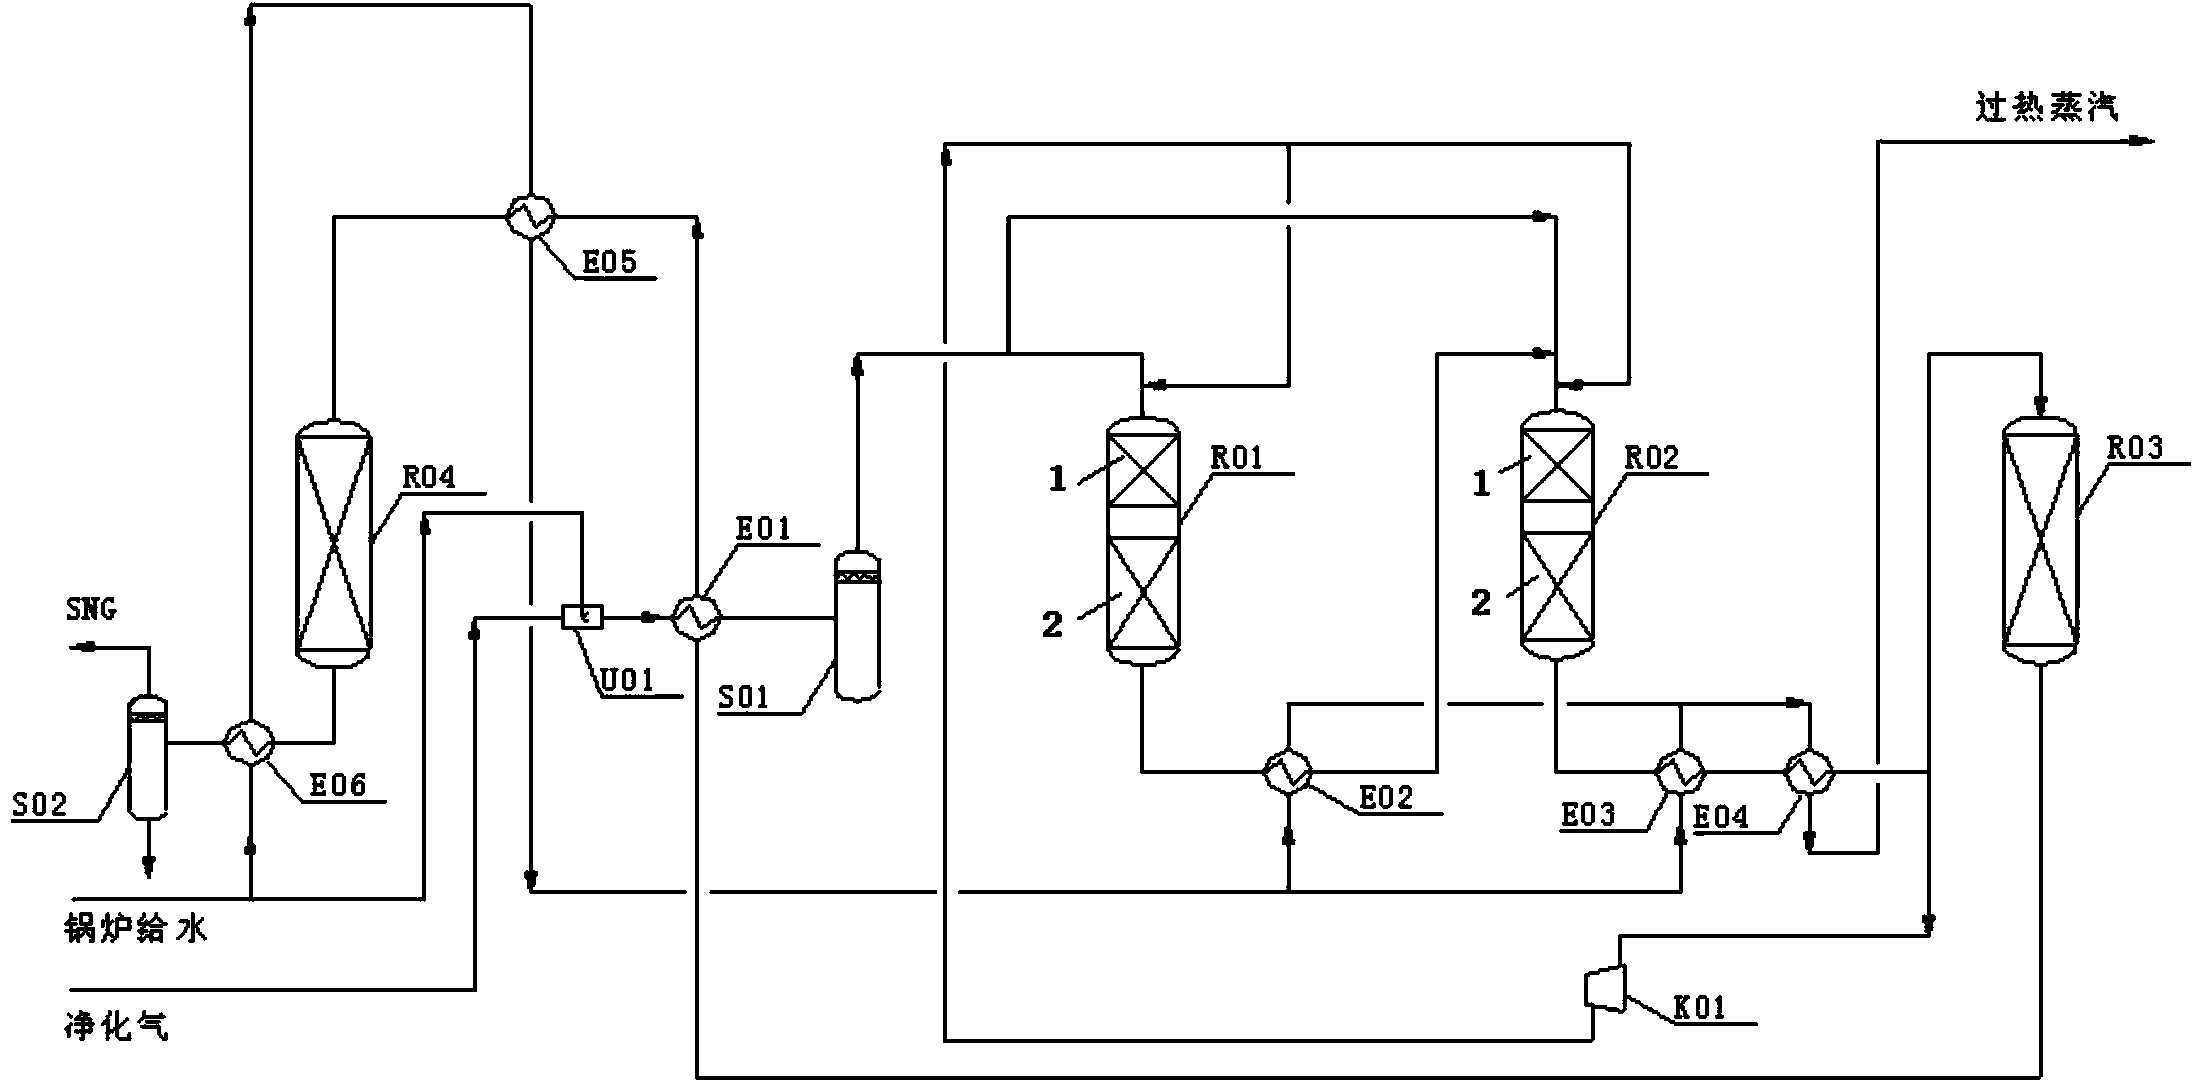 Coal natural gas methanation technology and system thereof